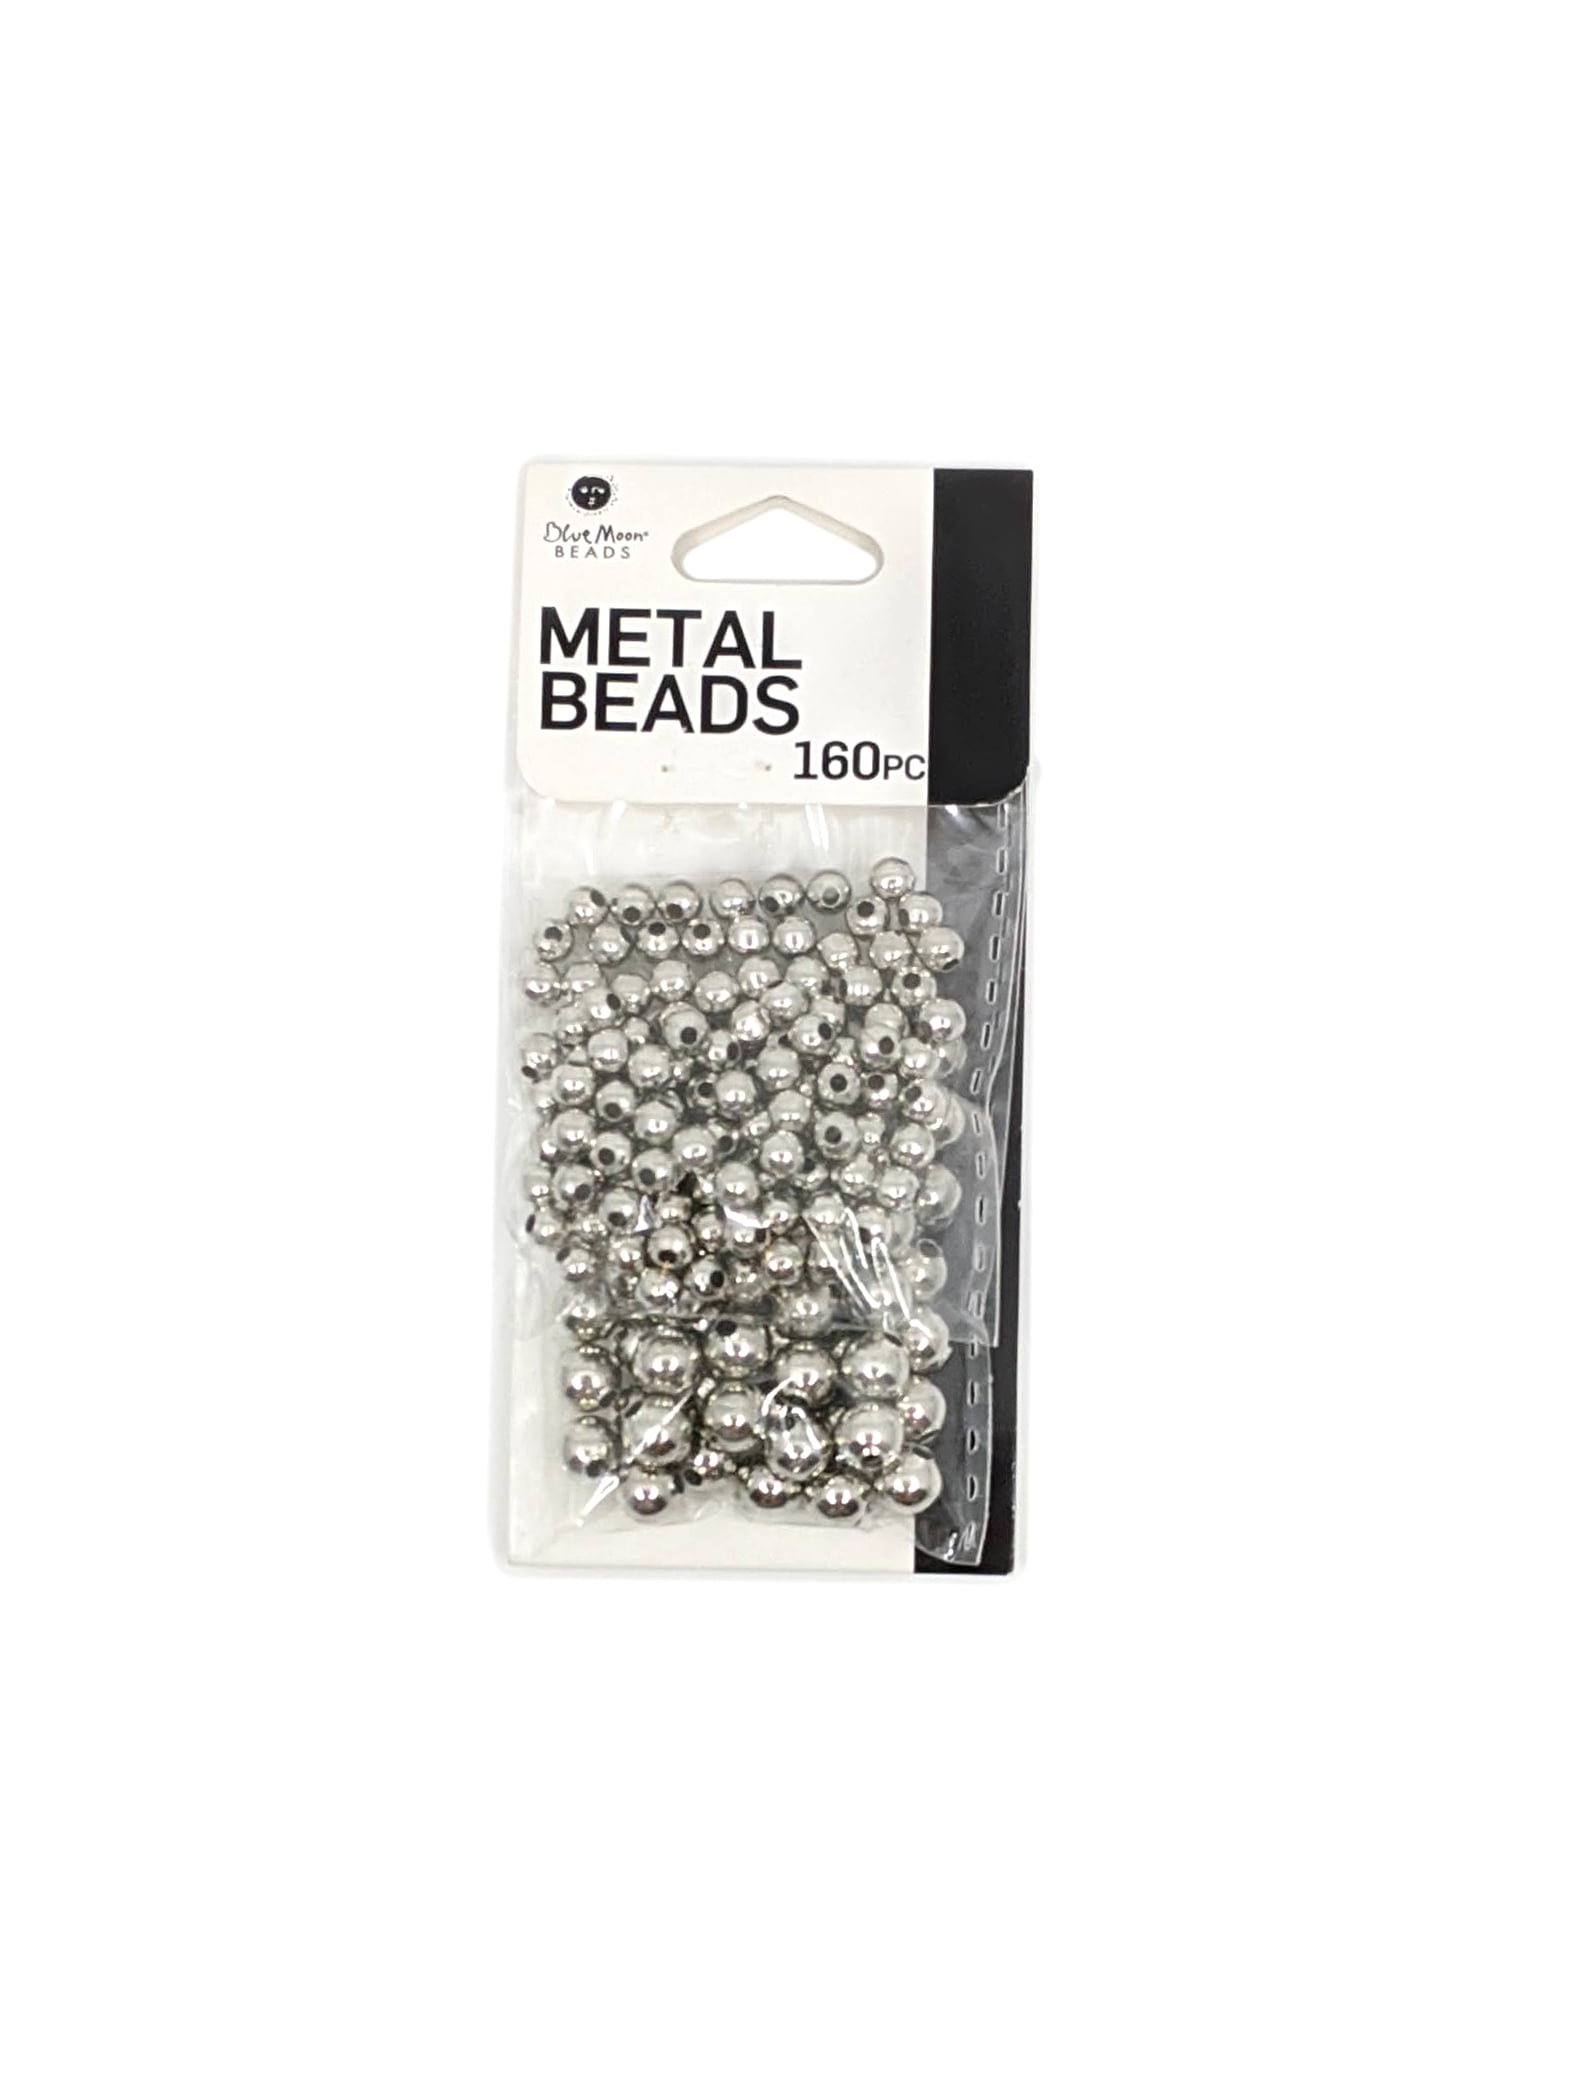 What Are Spacer Beads and How Can You Use Them? – The Bead Traders